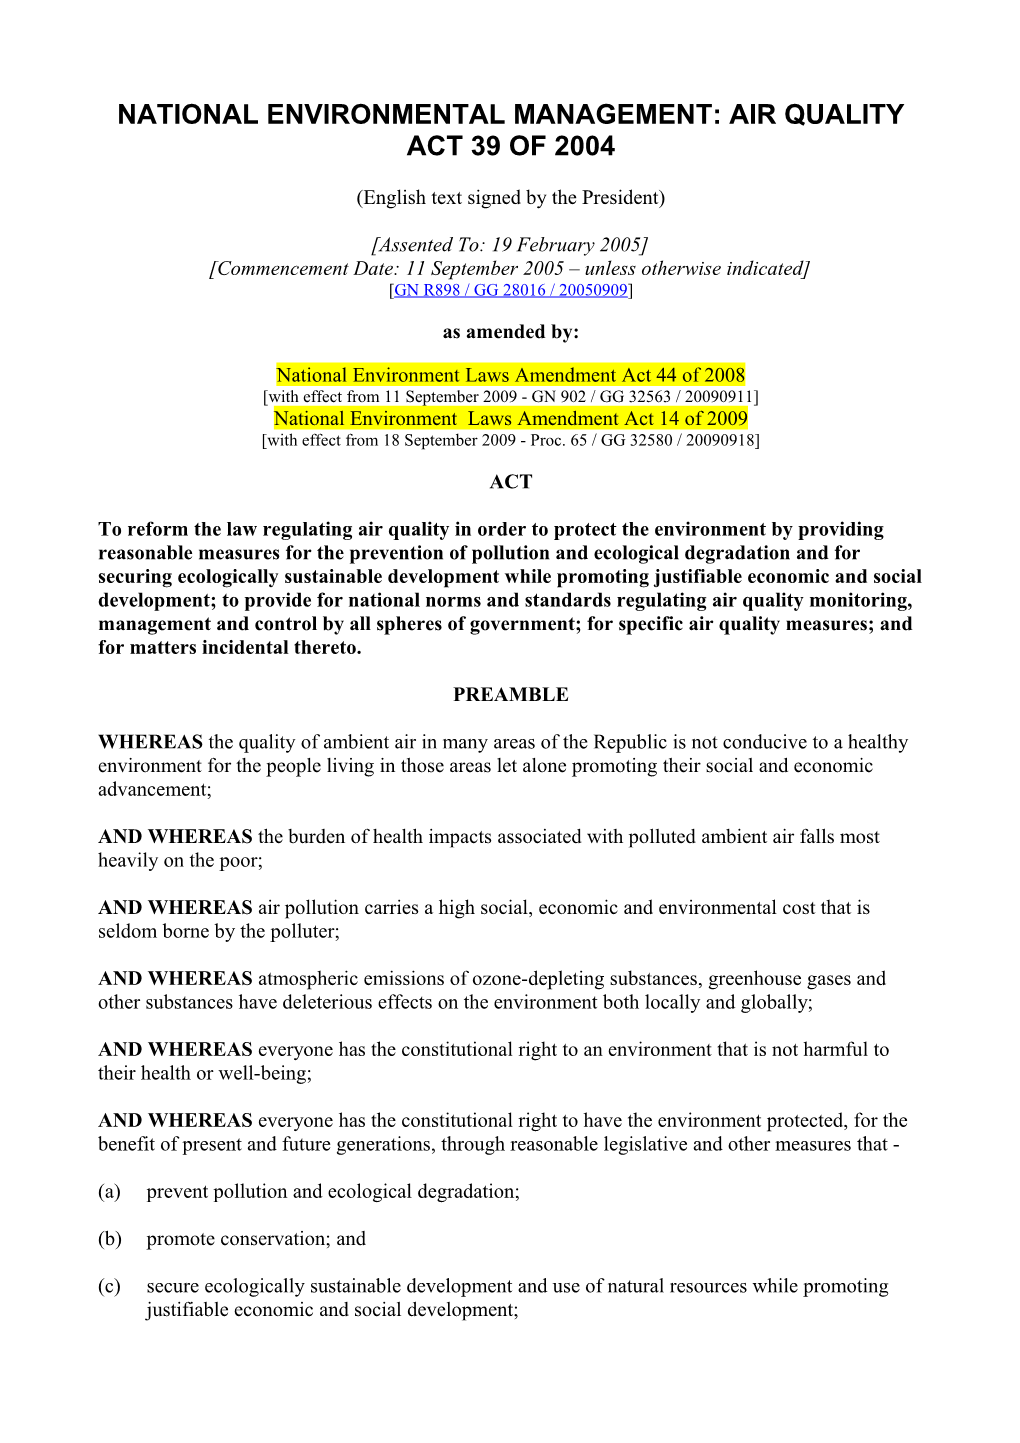 National Environmental Management: Air Quality Act 39 of 2004